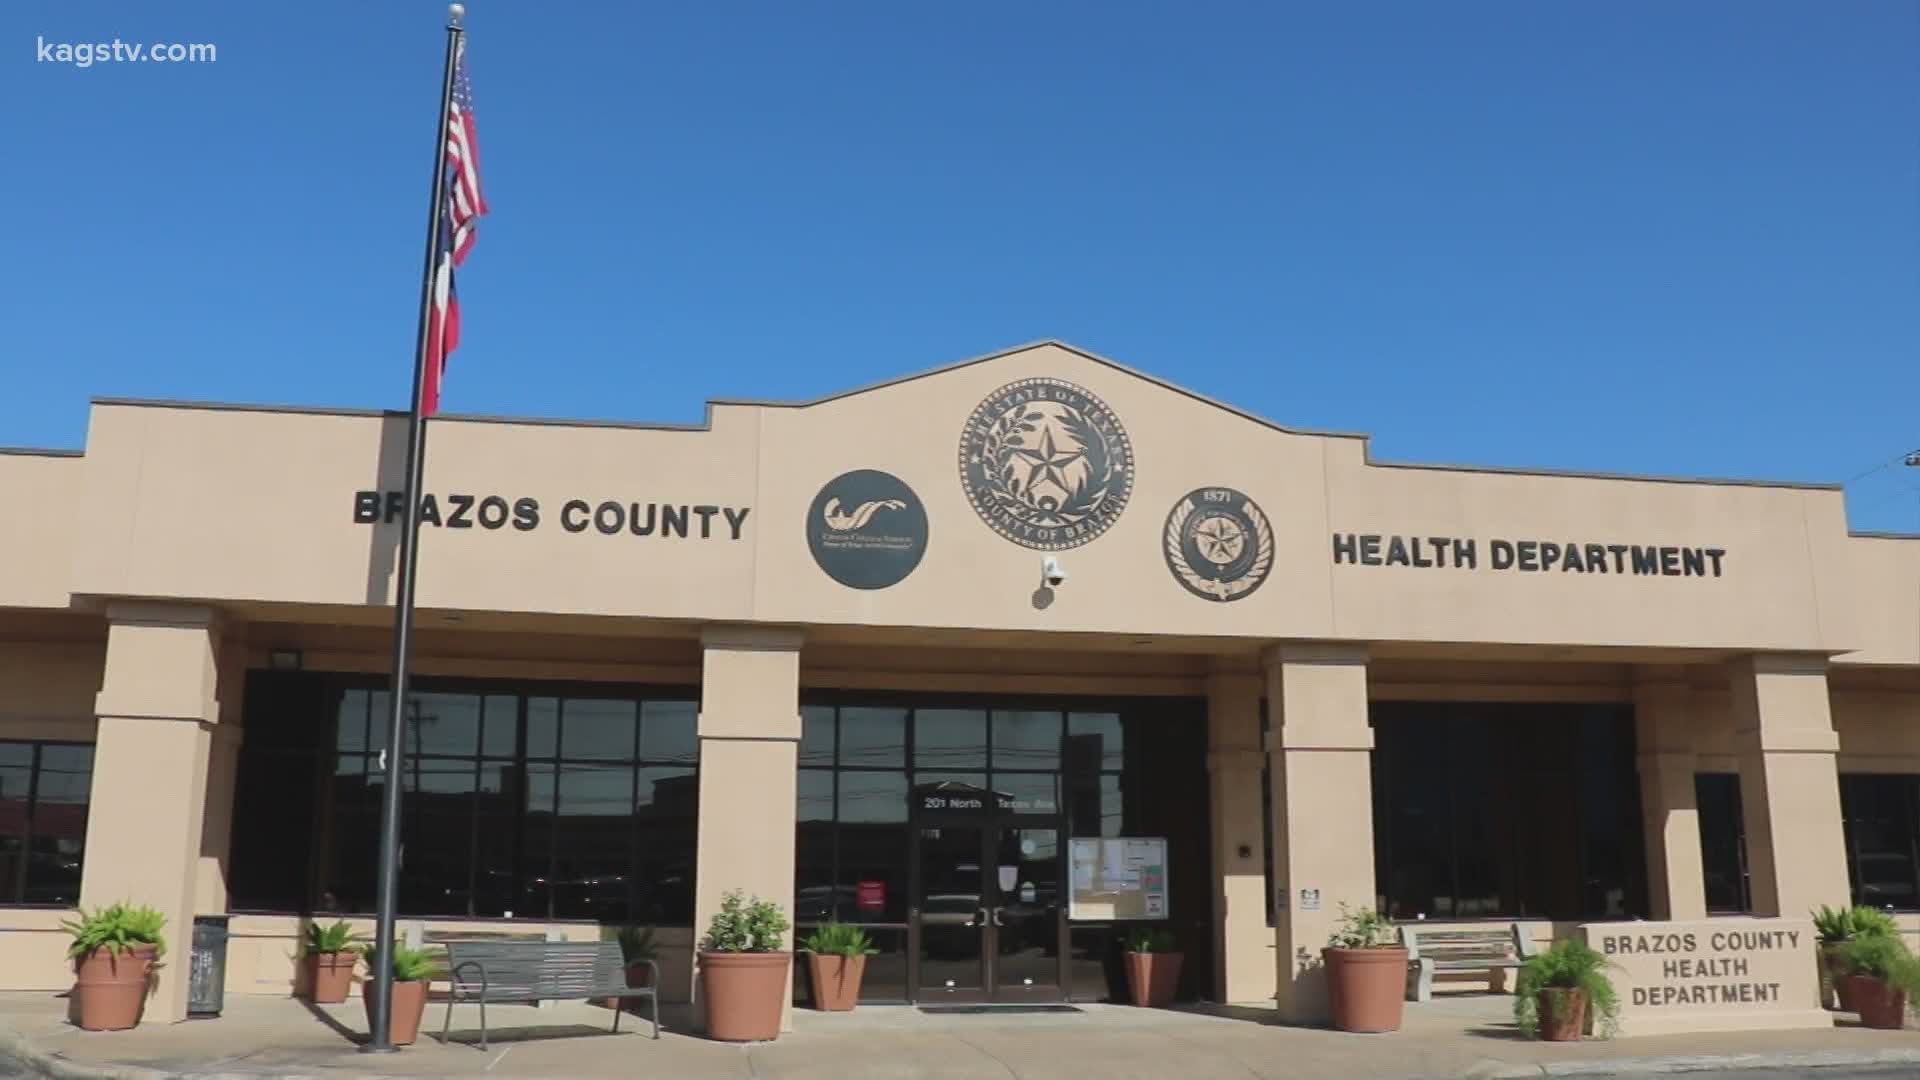 The likelihood of people testing positive for COVID-19 in Brazos County continues to increase.